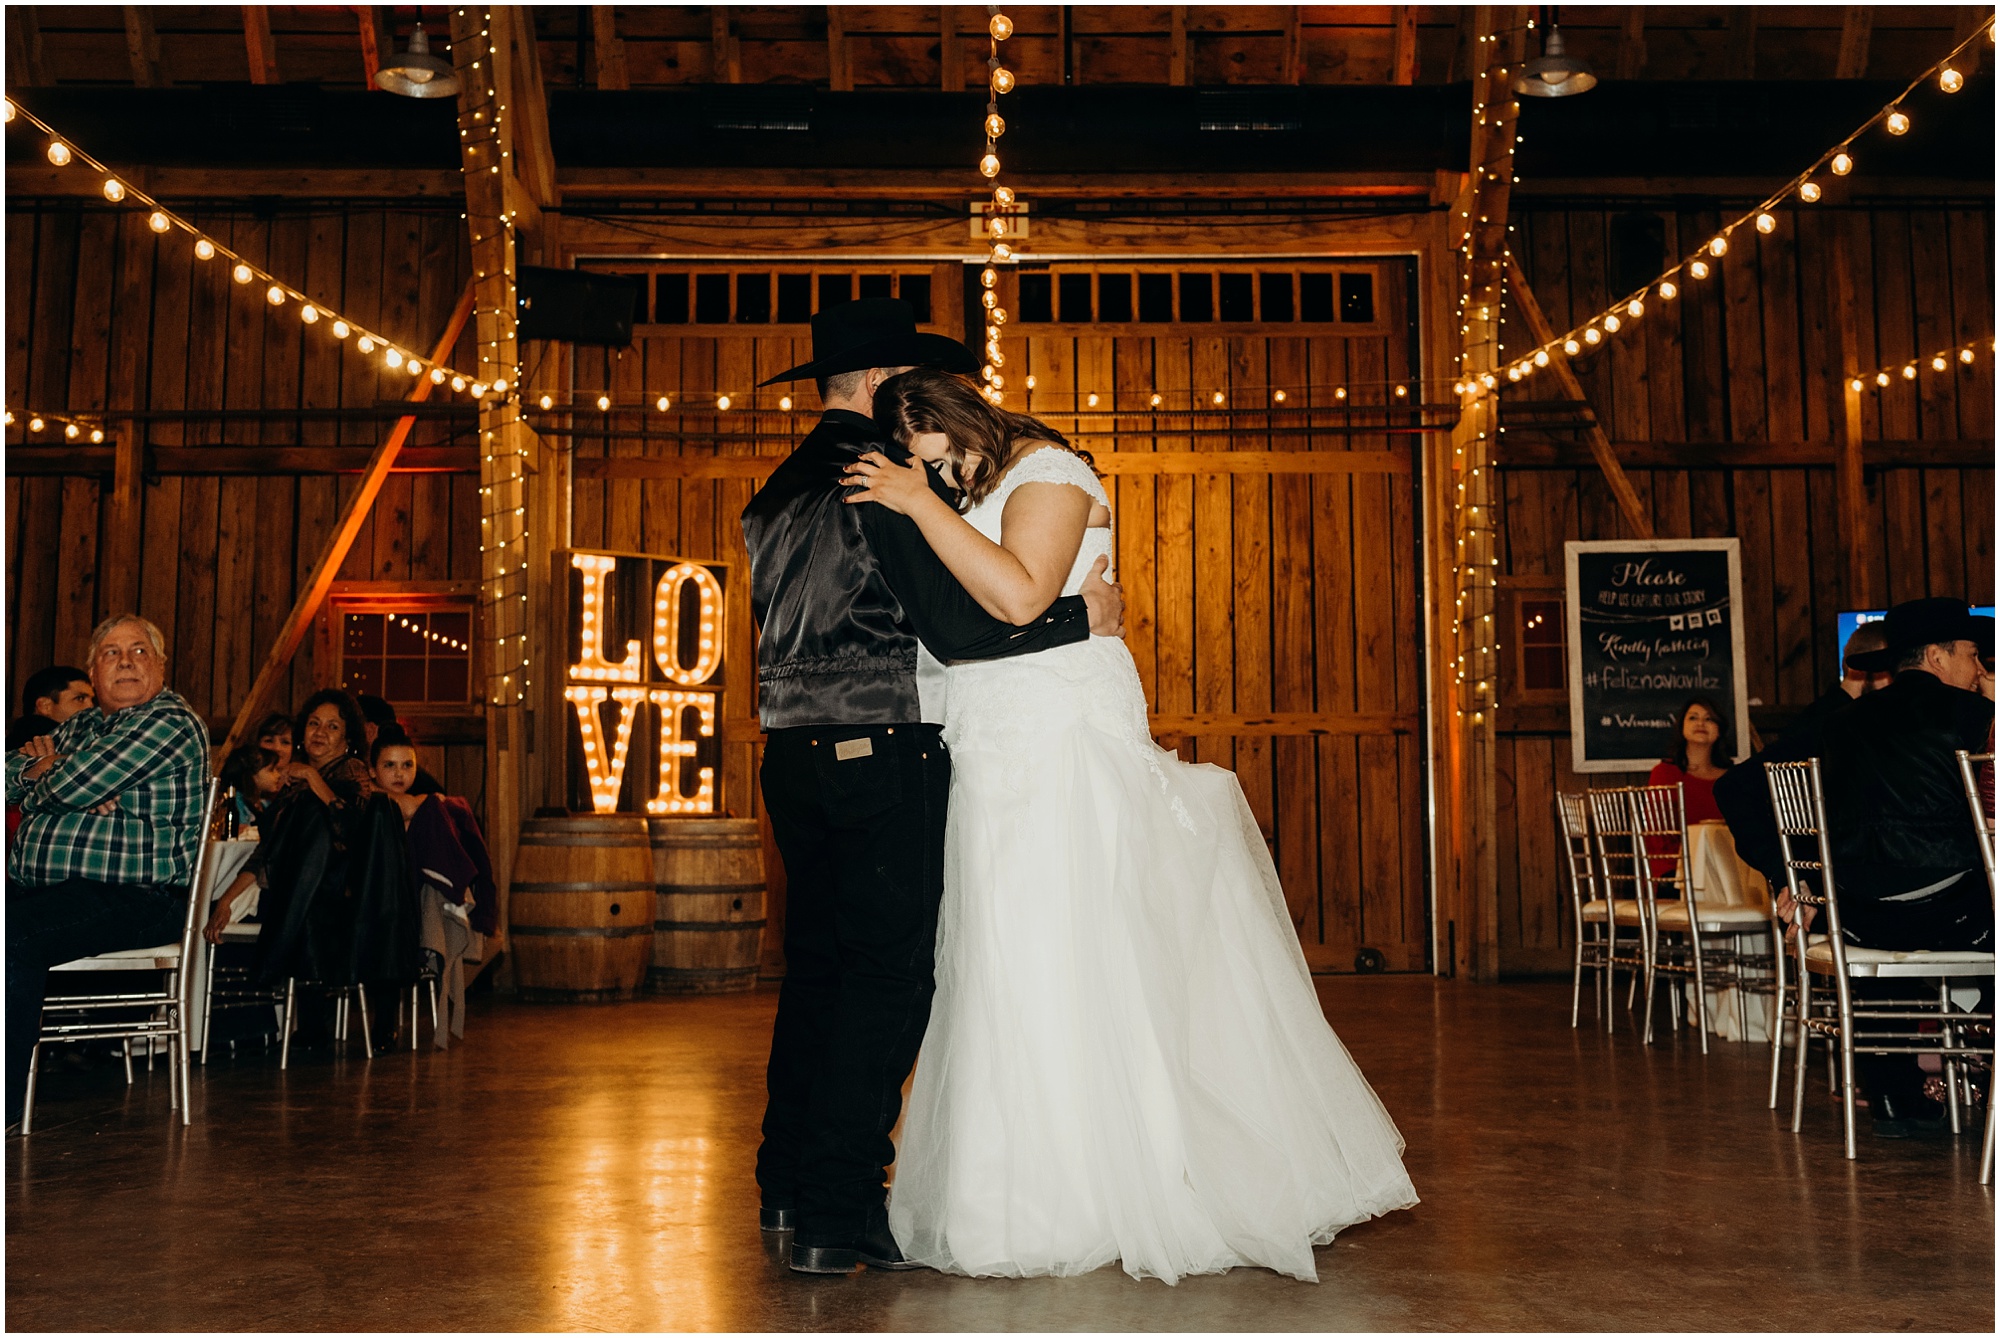 Intimate first dance photo from the couples Country Christmas Wedding Reception in a barn.